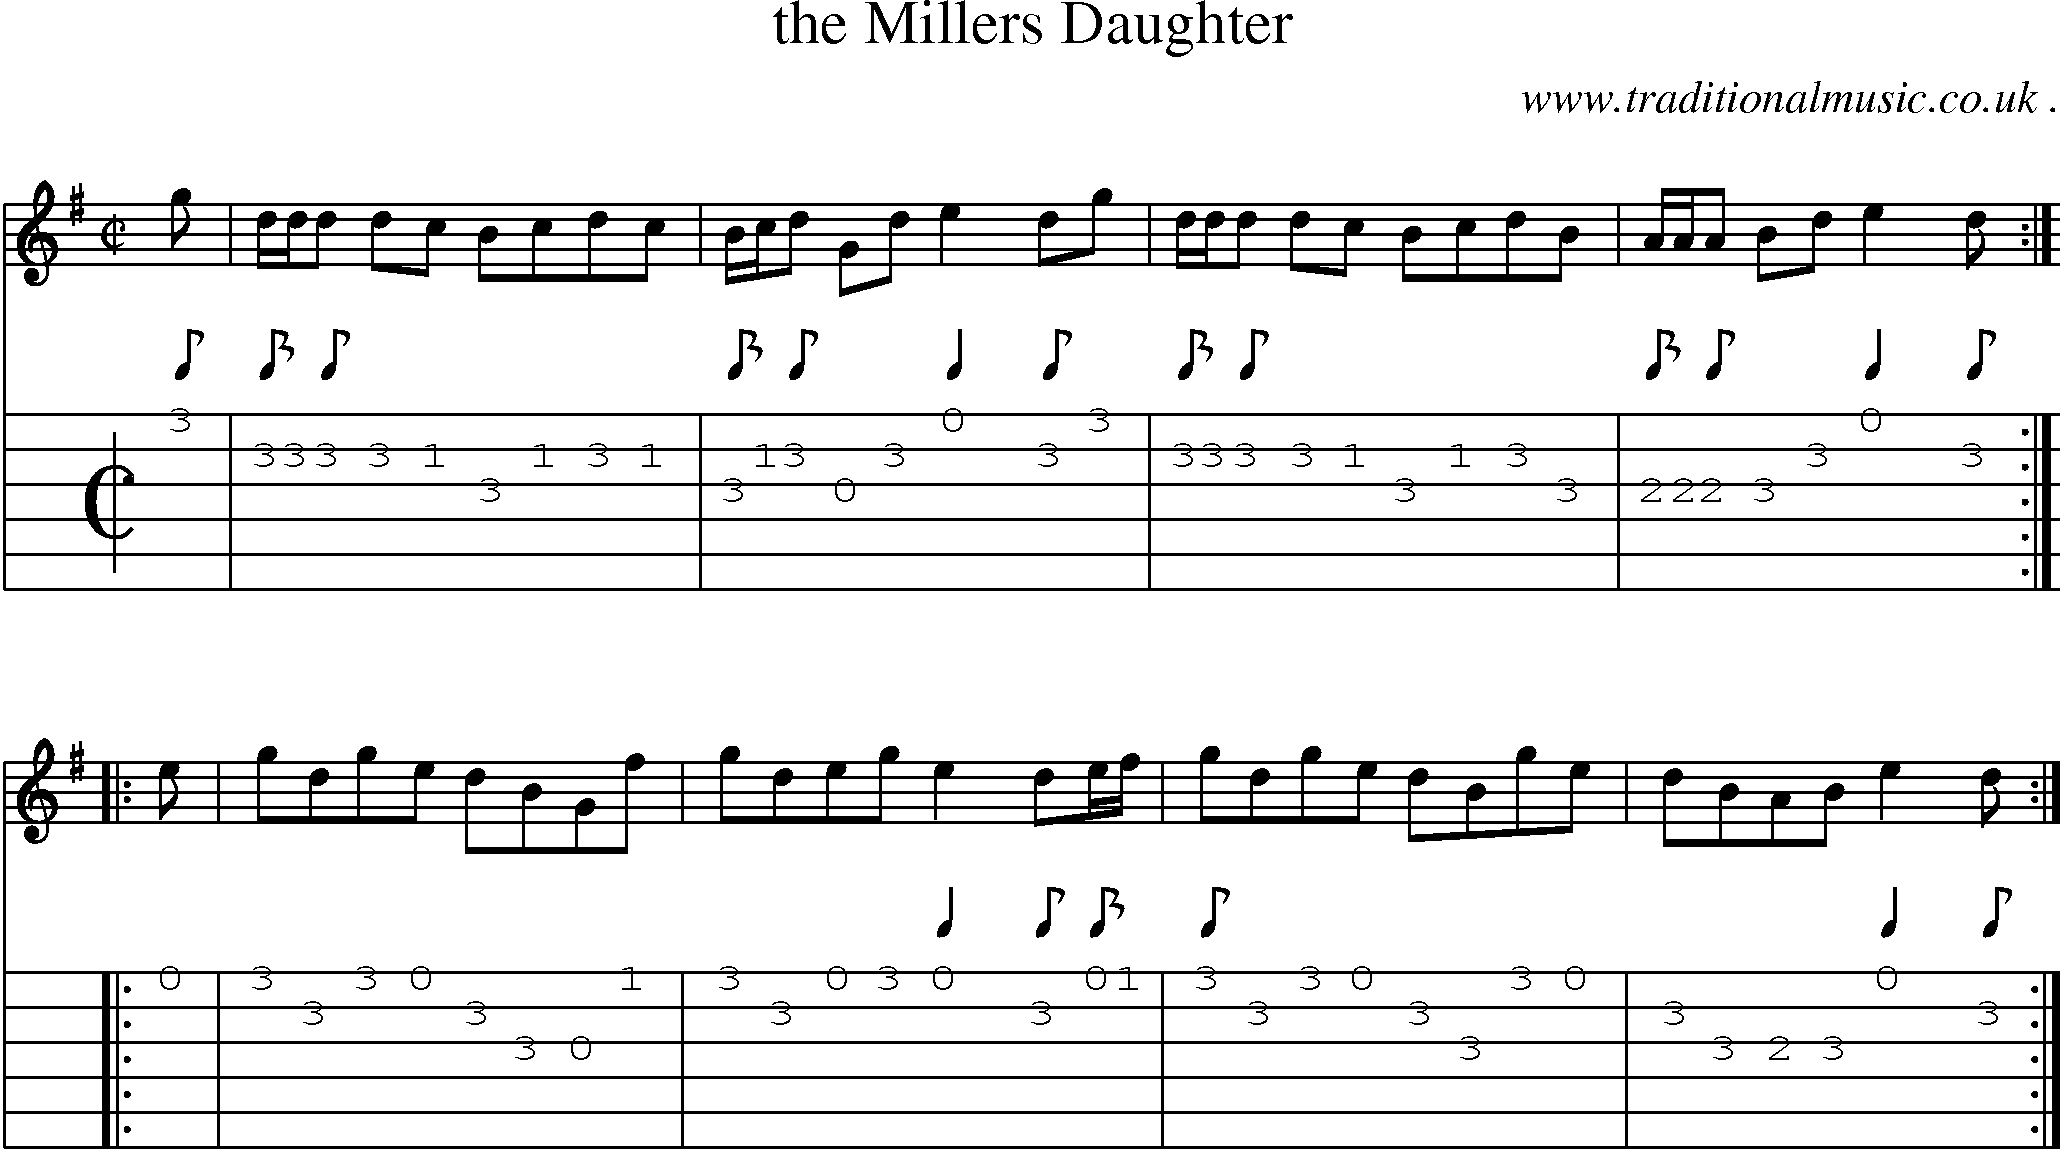 Sheet-Music and Guitar Tabs for The Millers Daughter